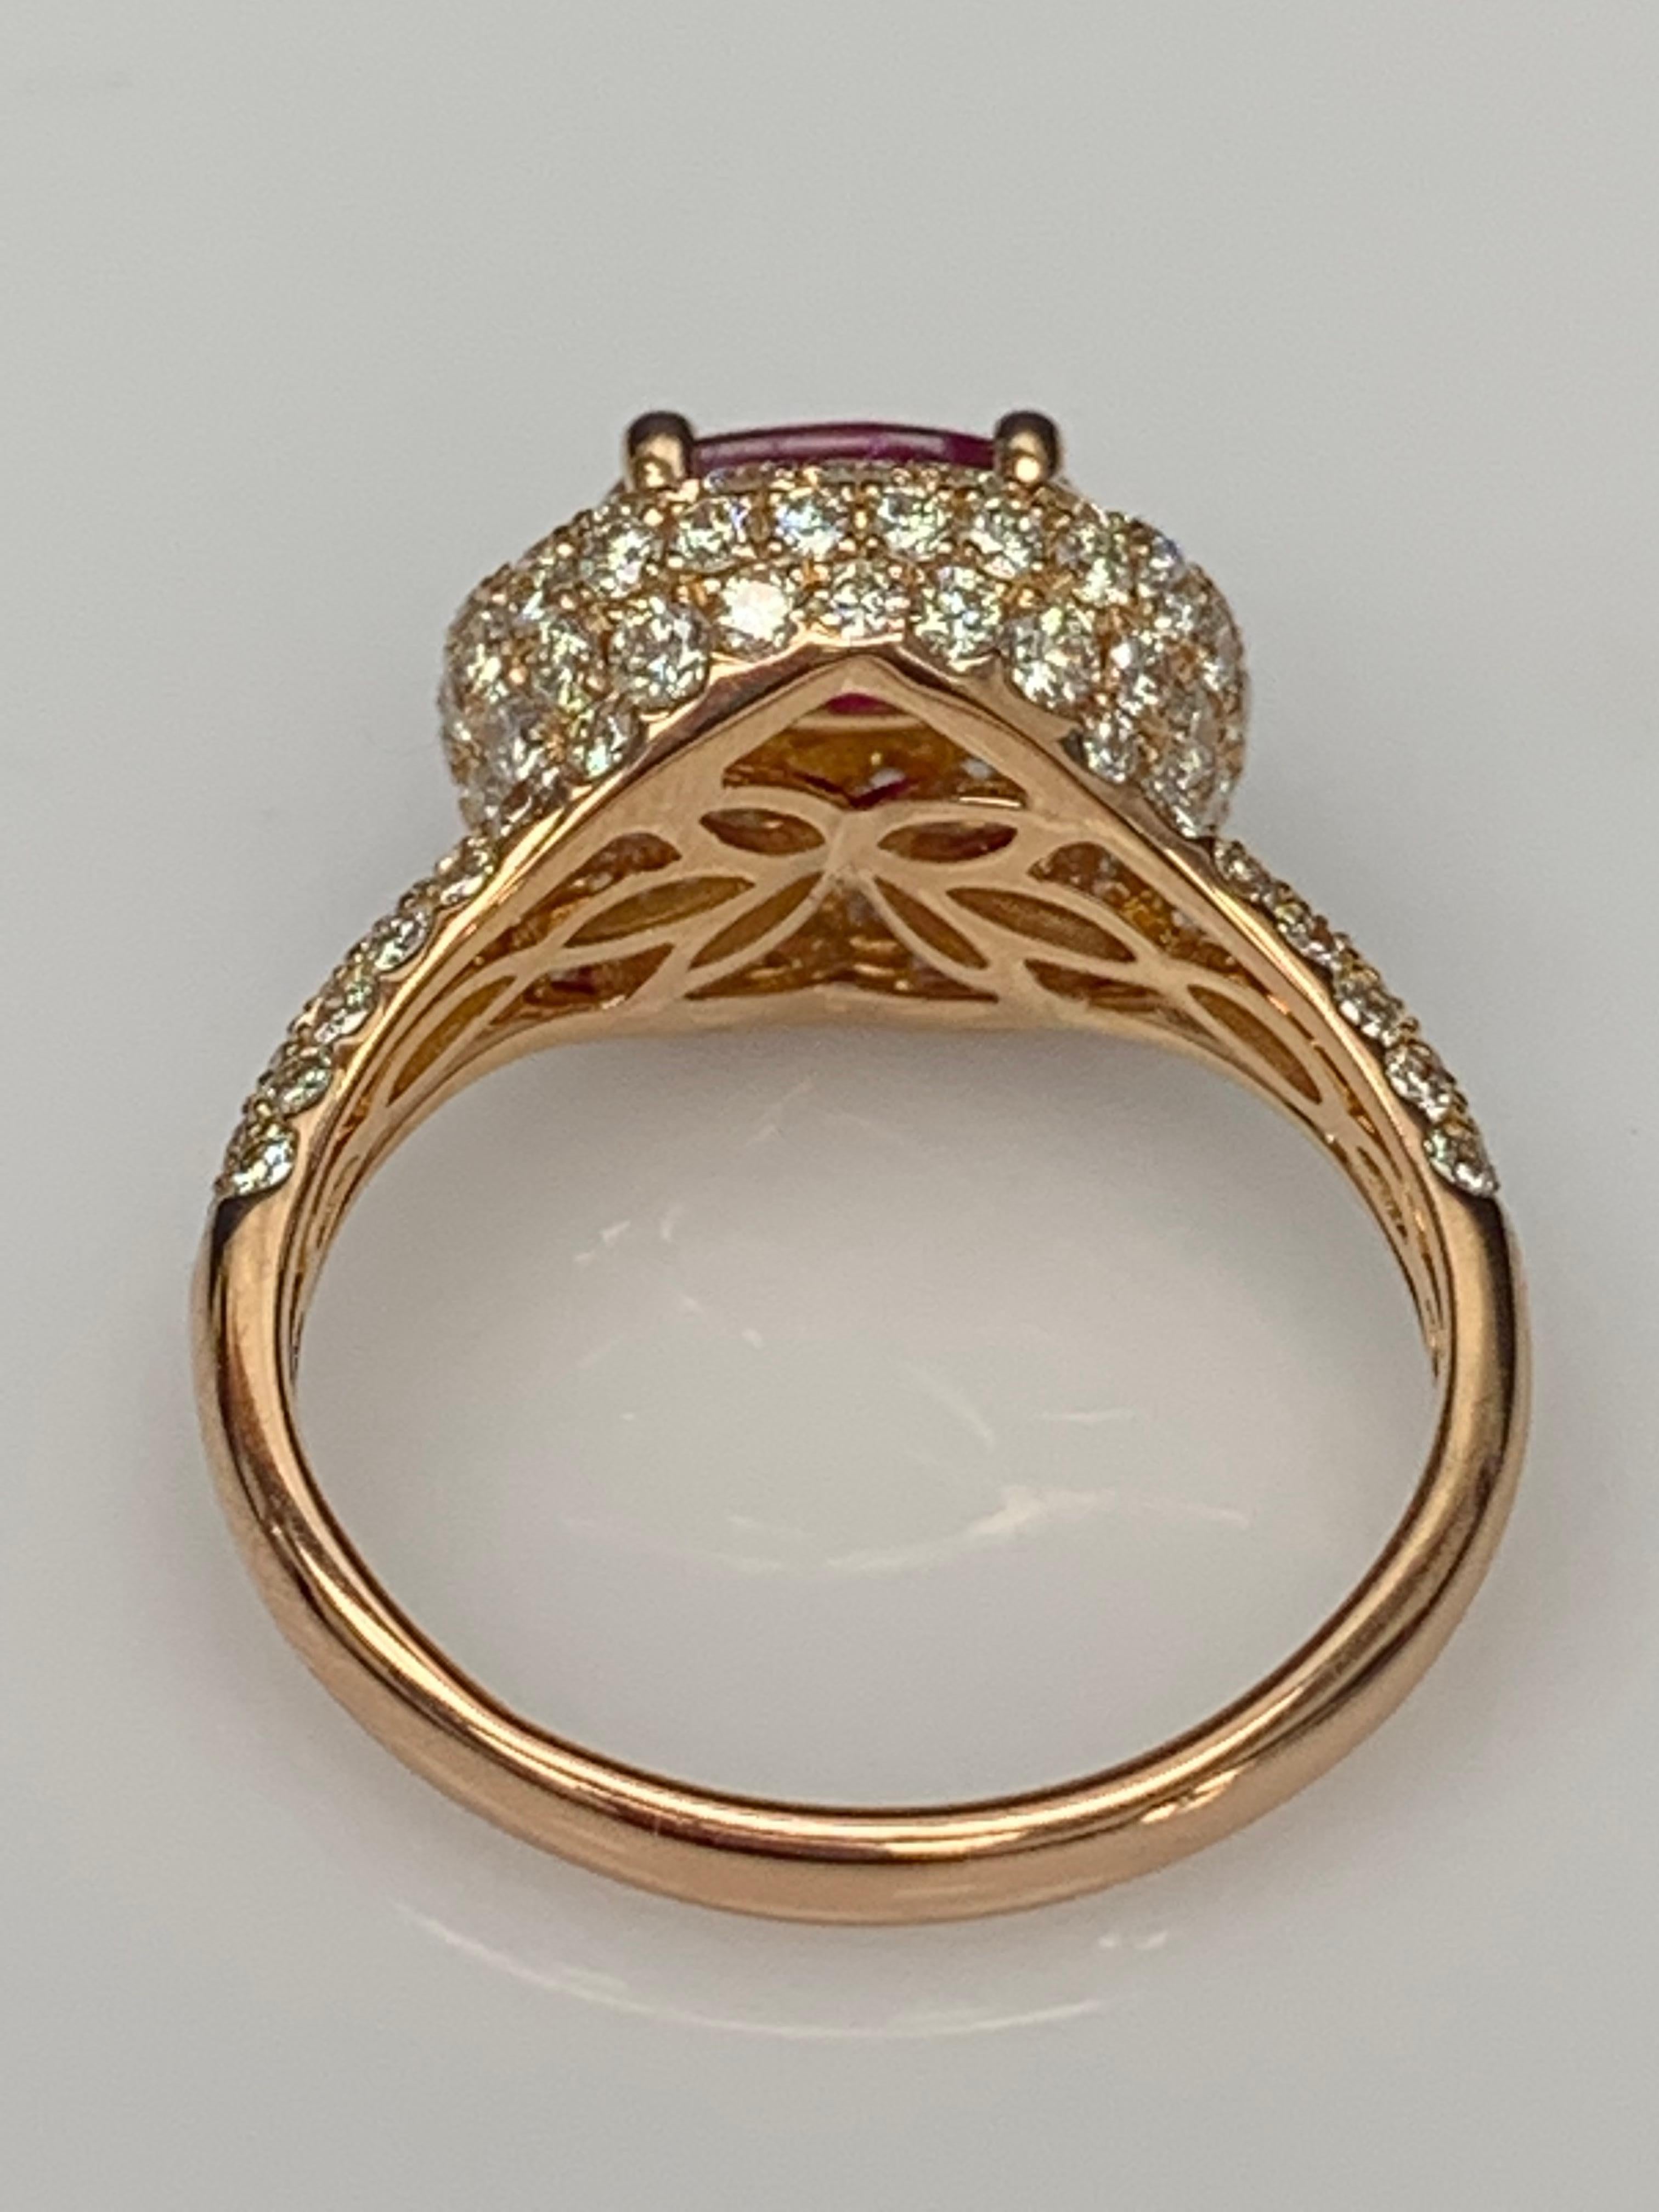 1.26 Carat Oval Cut Ruby and Diamond Fashion Ring in 18K Rose Gold For Sale 3